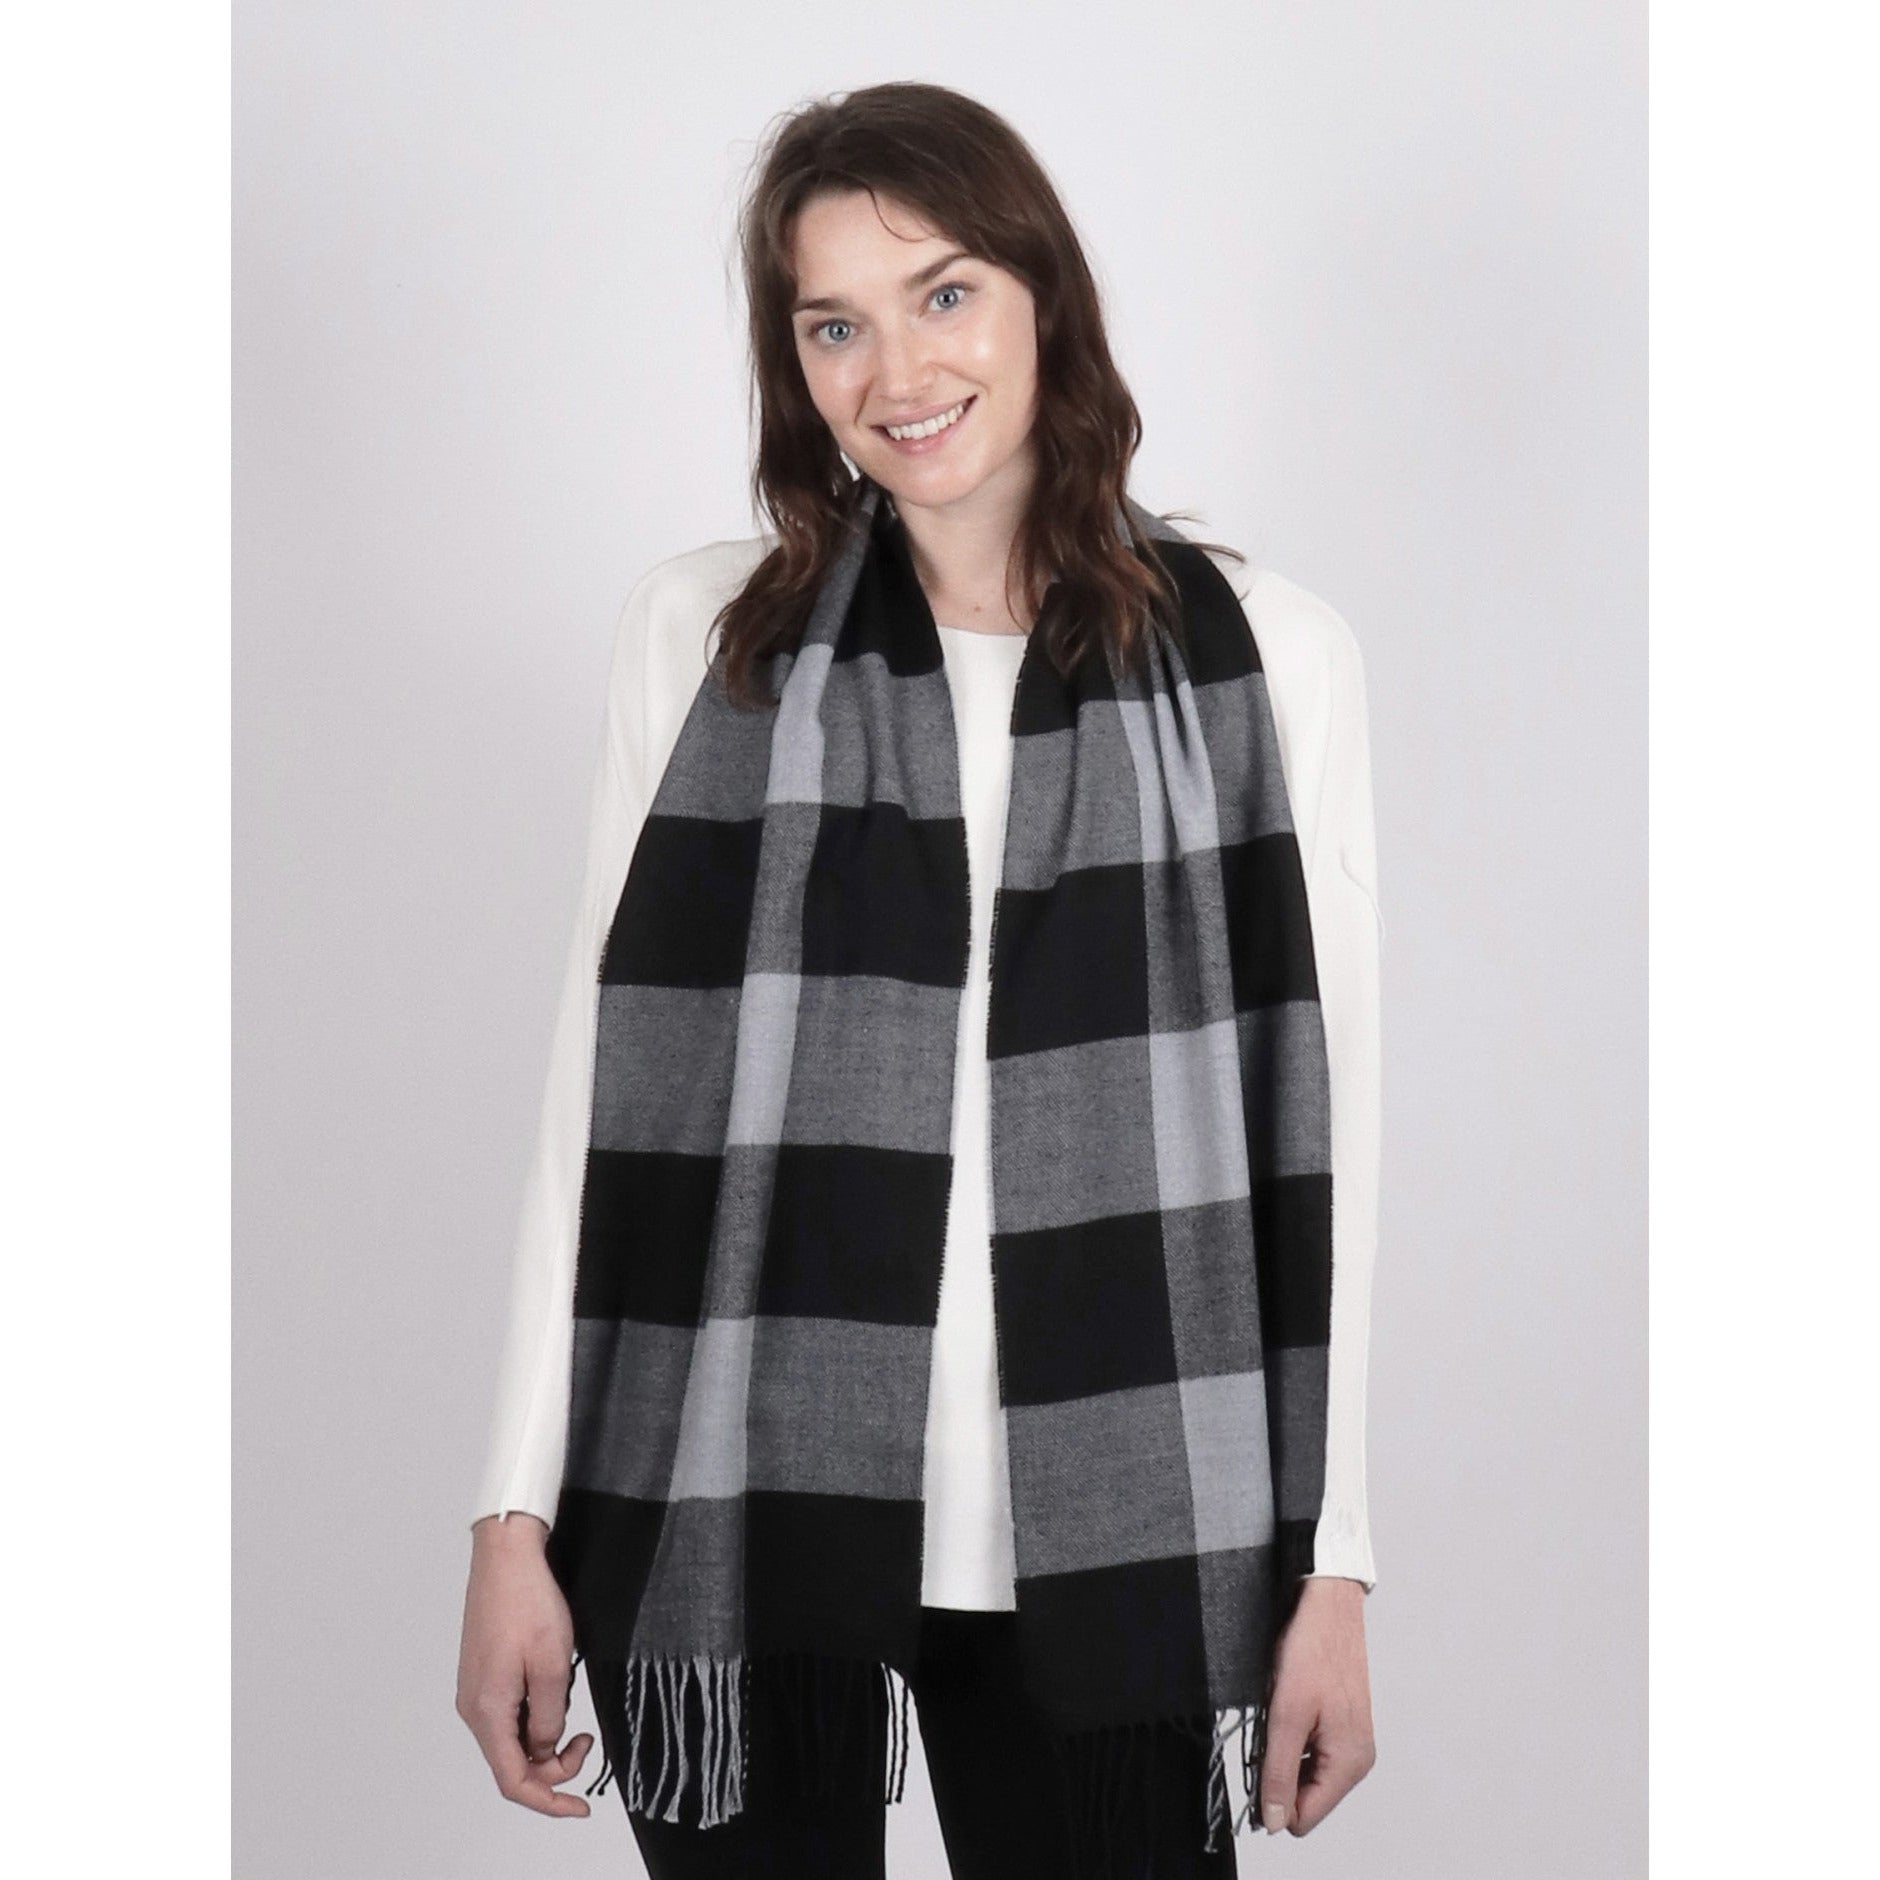 Scarf - Monotone With Large Squares